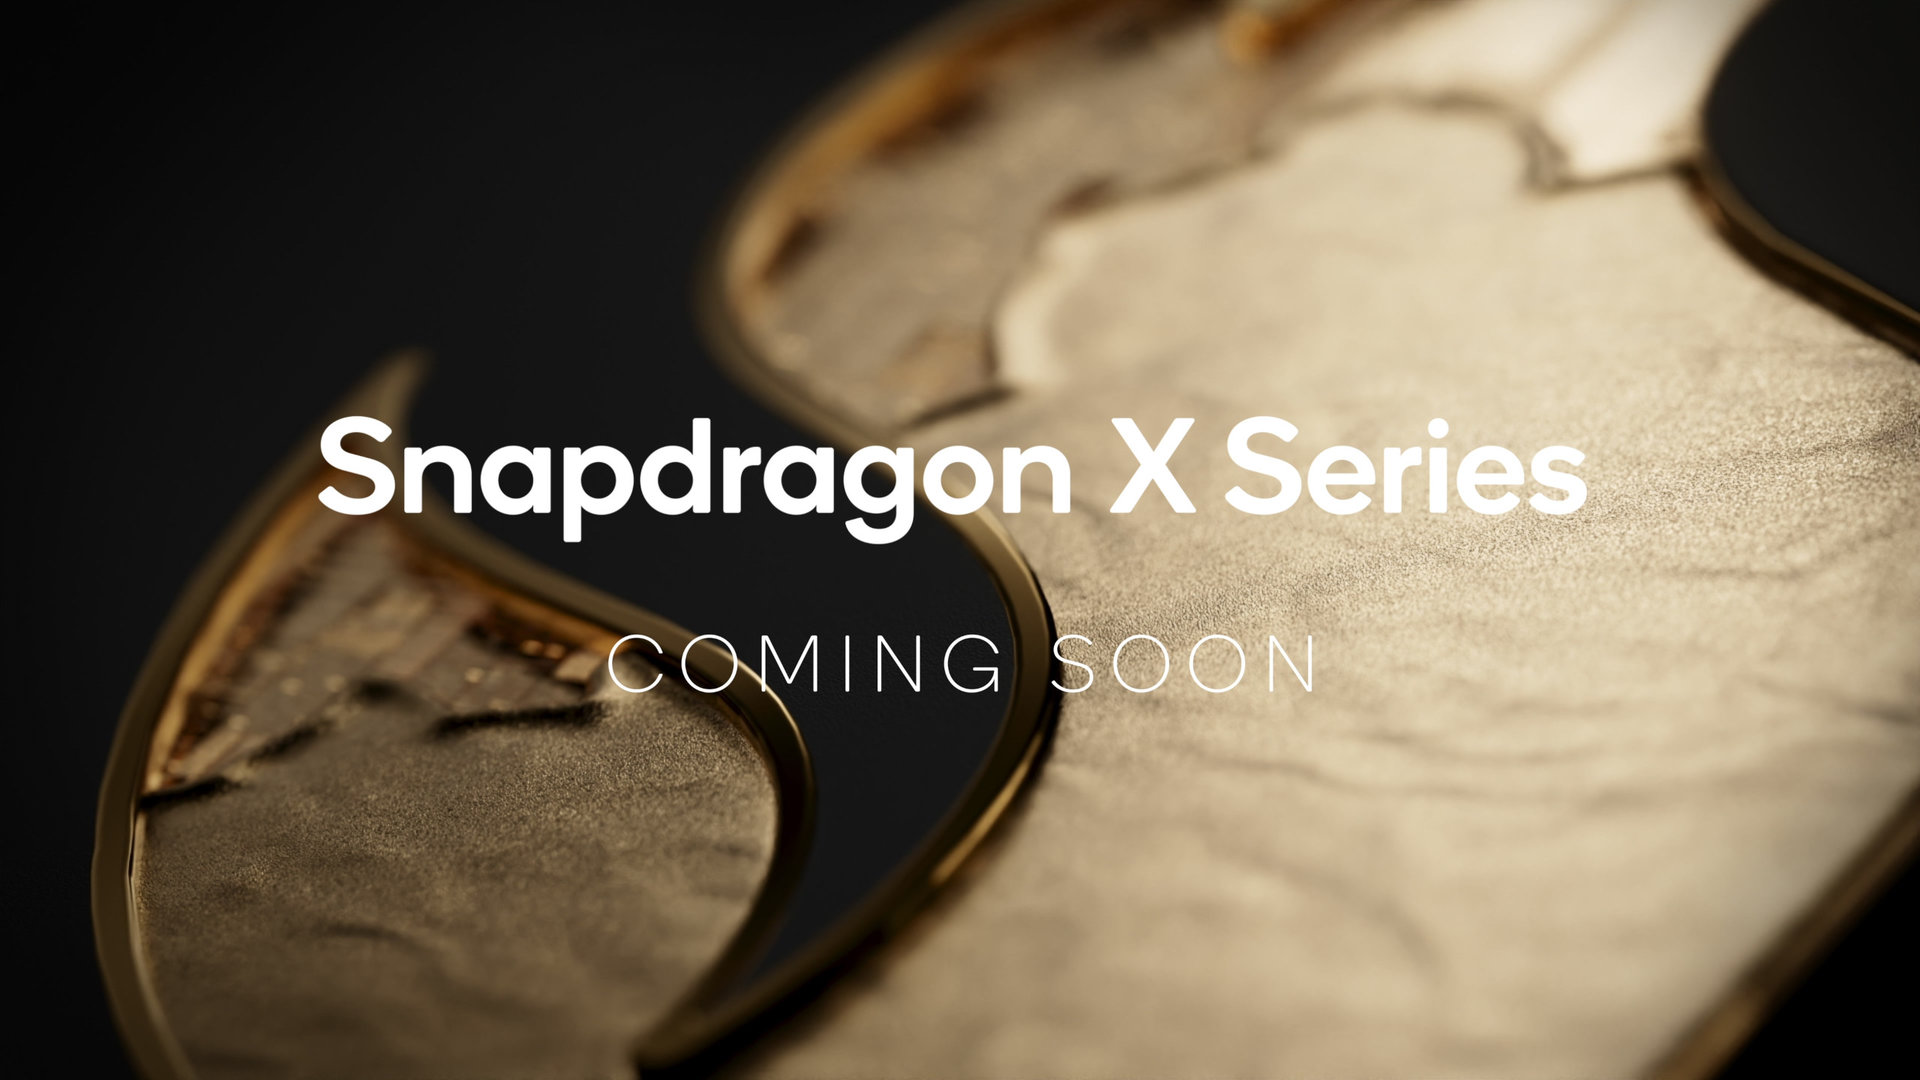 The Snapdragon X series.